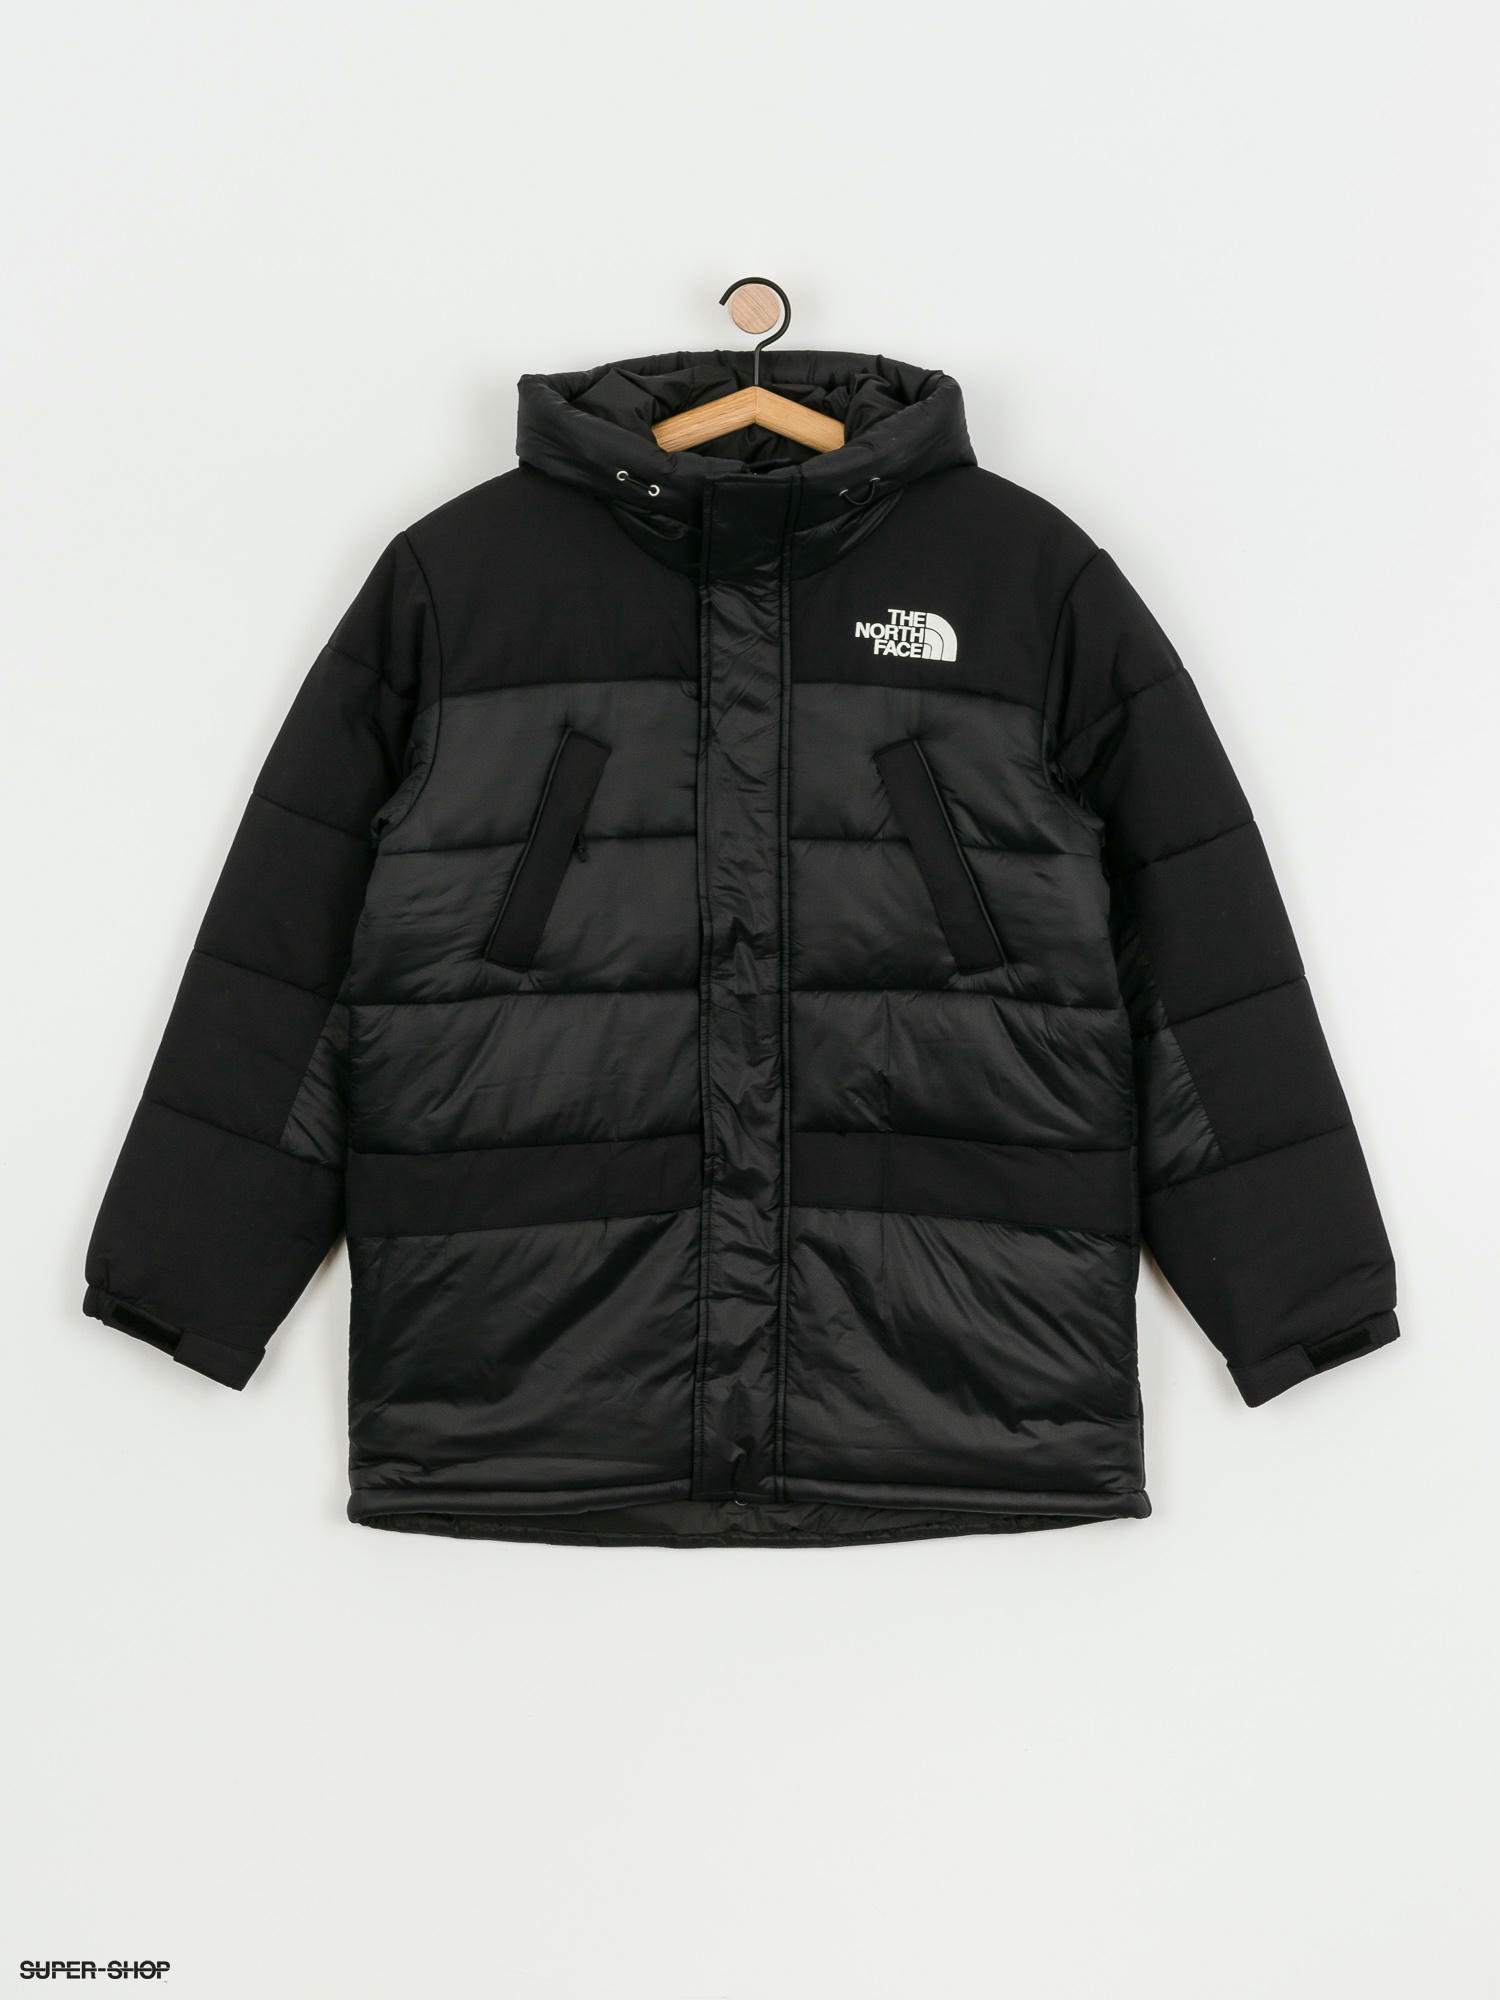 the north face insulated parka